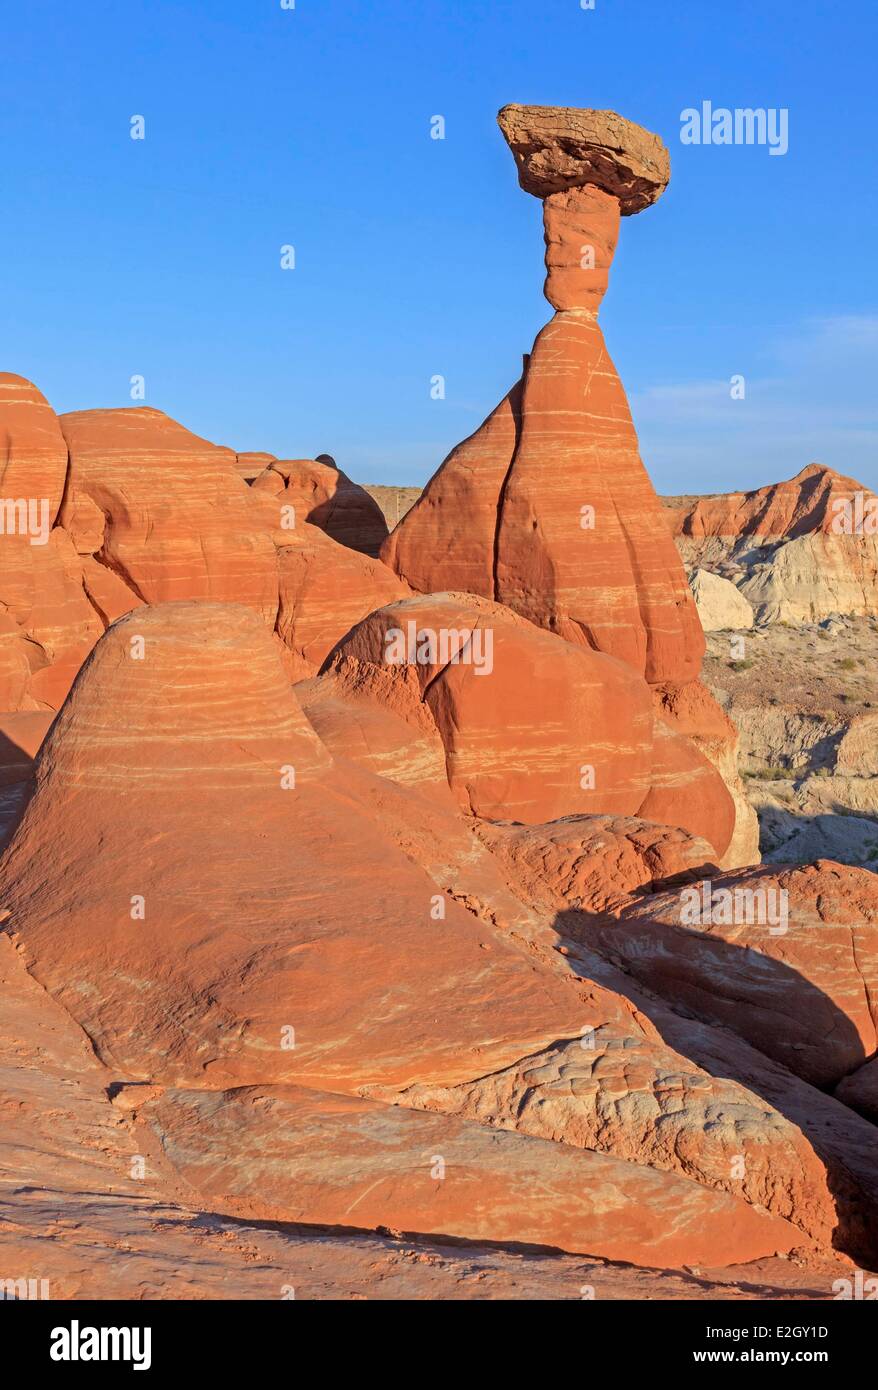 United States Utah Colorado Plateau Grand Staircase-Escalante National Monument near Kanab rock formations called Toadstool Hoodoos at sunset Stock Photo